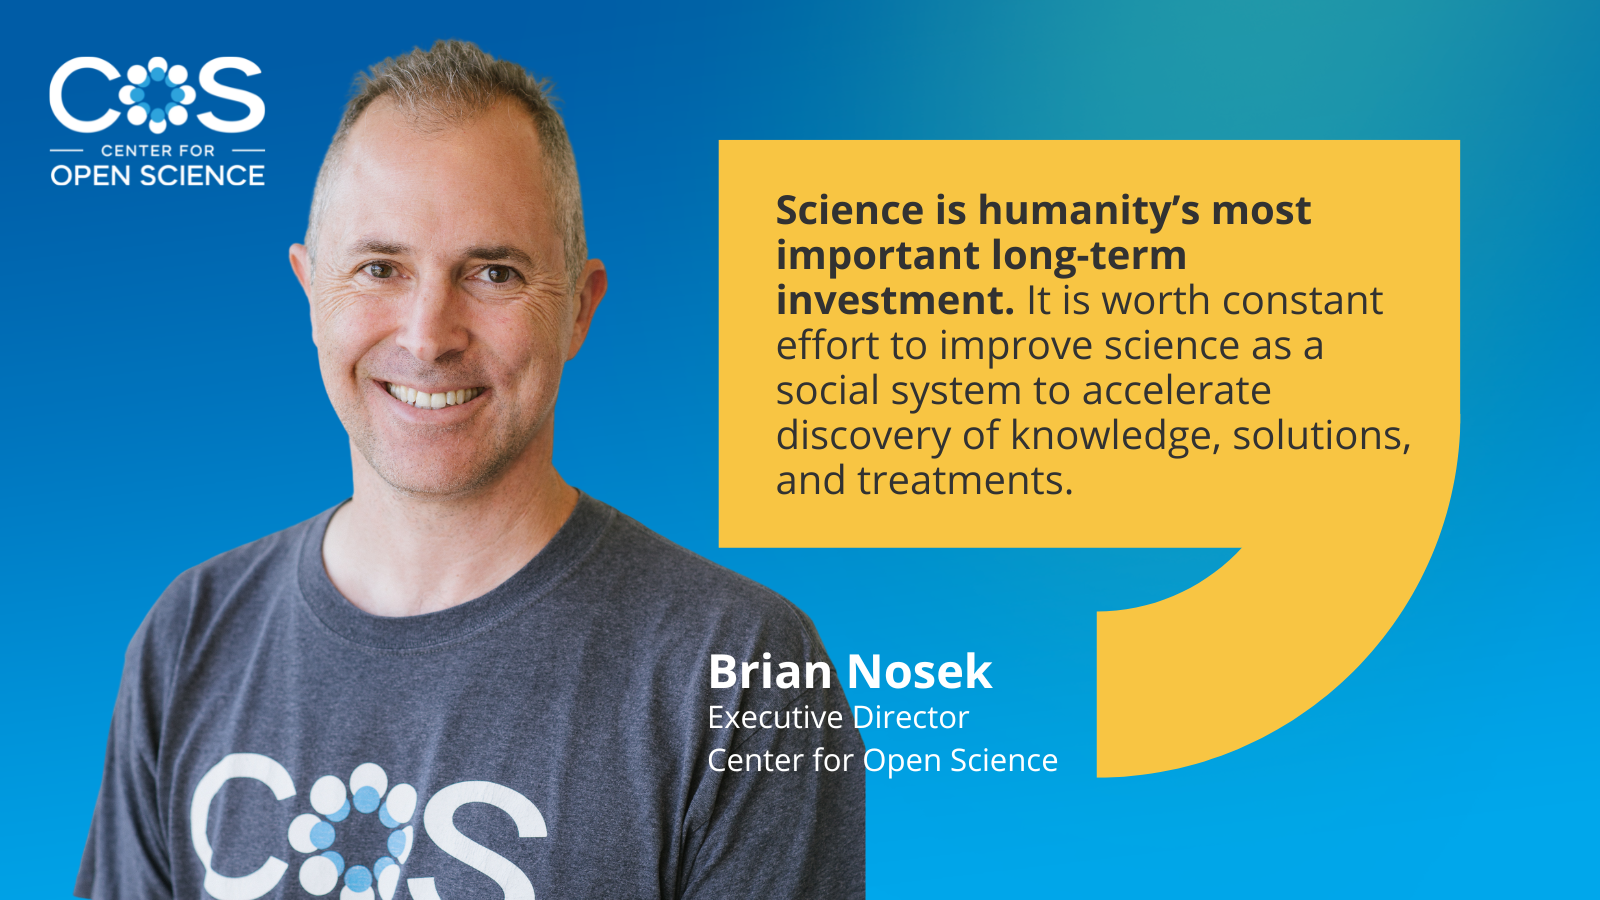 Image of Brian Nosek with quote: Science is humanity’s most important long-term investment. It is worth constant effort to improve science as a social system to accelerate discovery of knowledge, solutions, and treatments. 